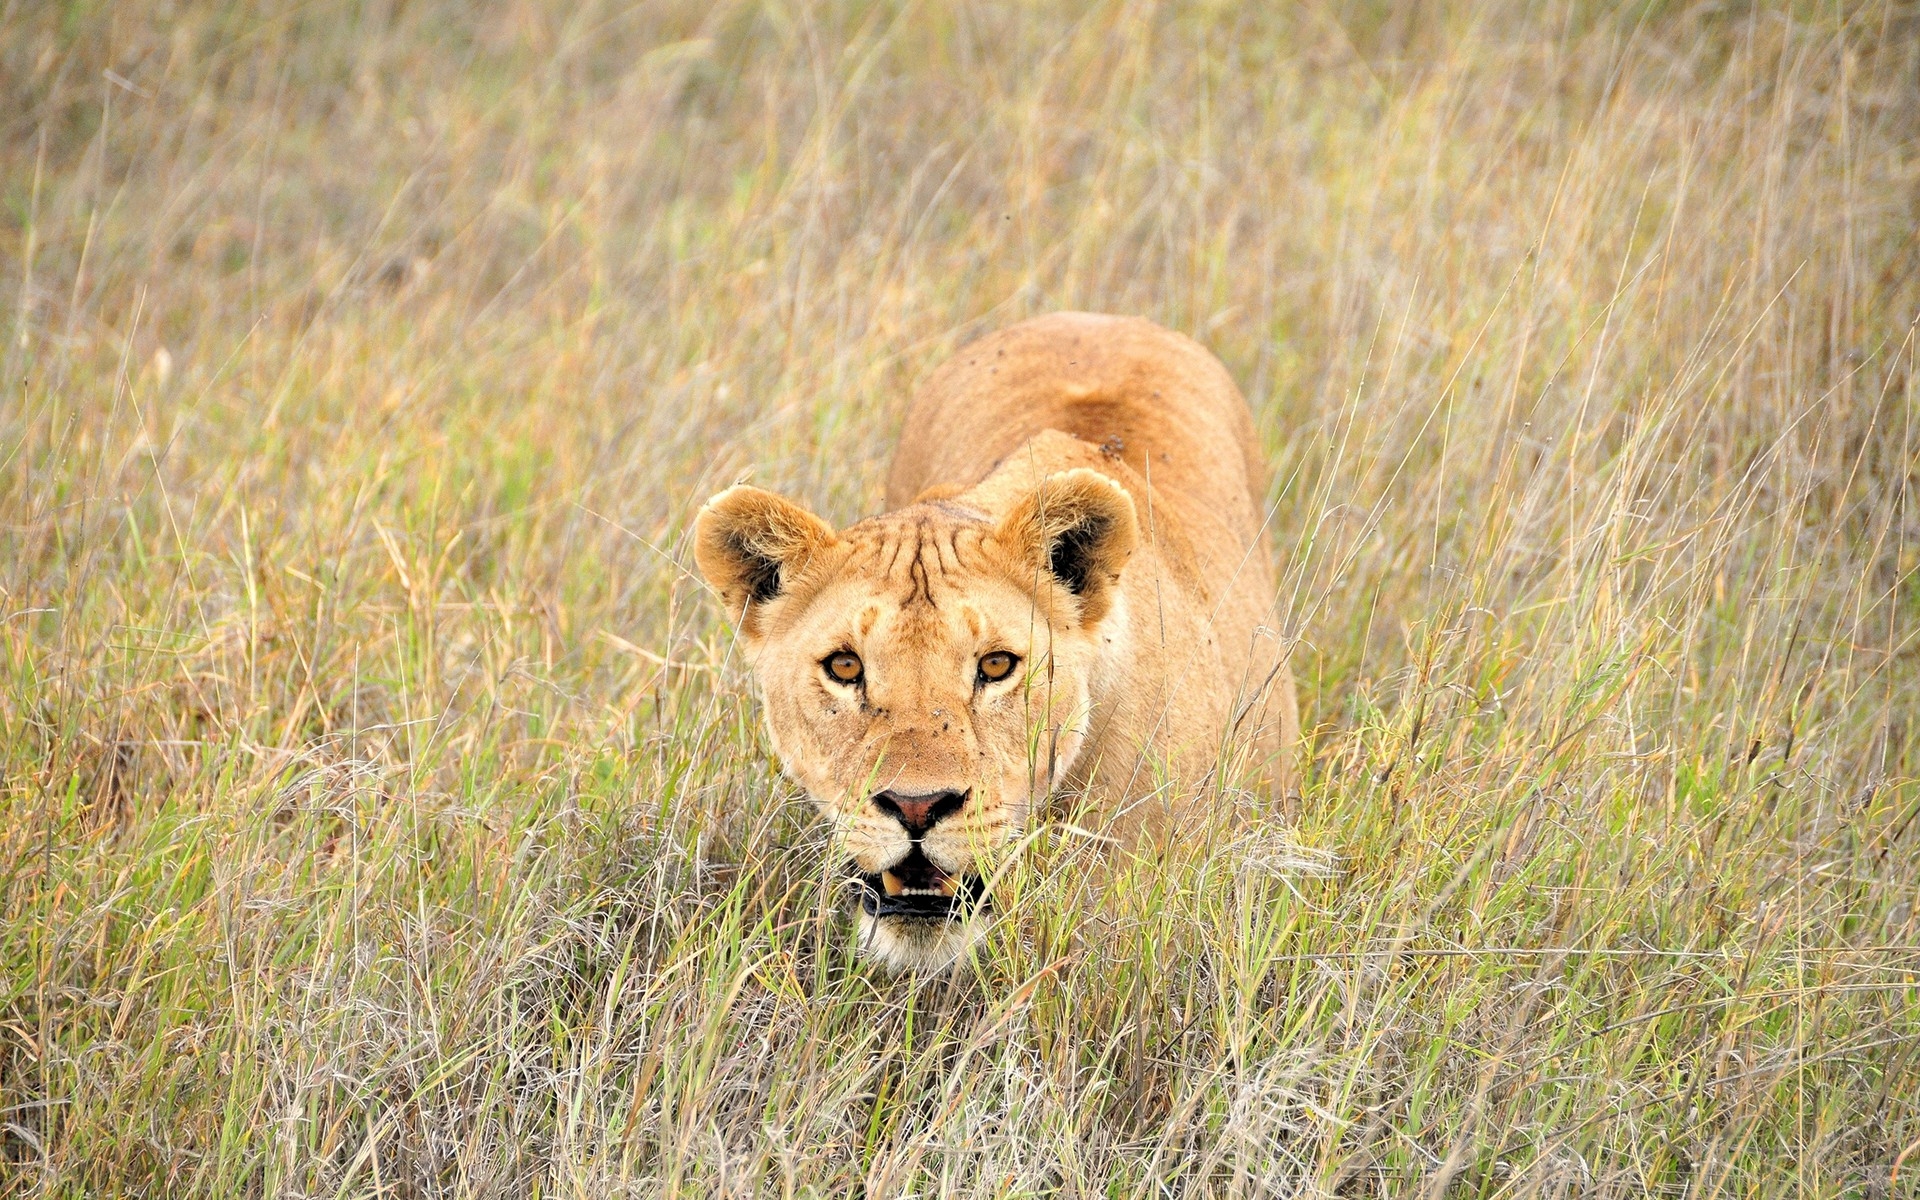 A lioness crouches in the tall grass